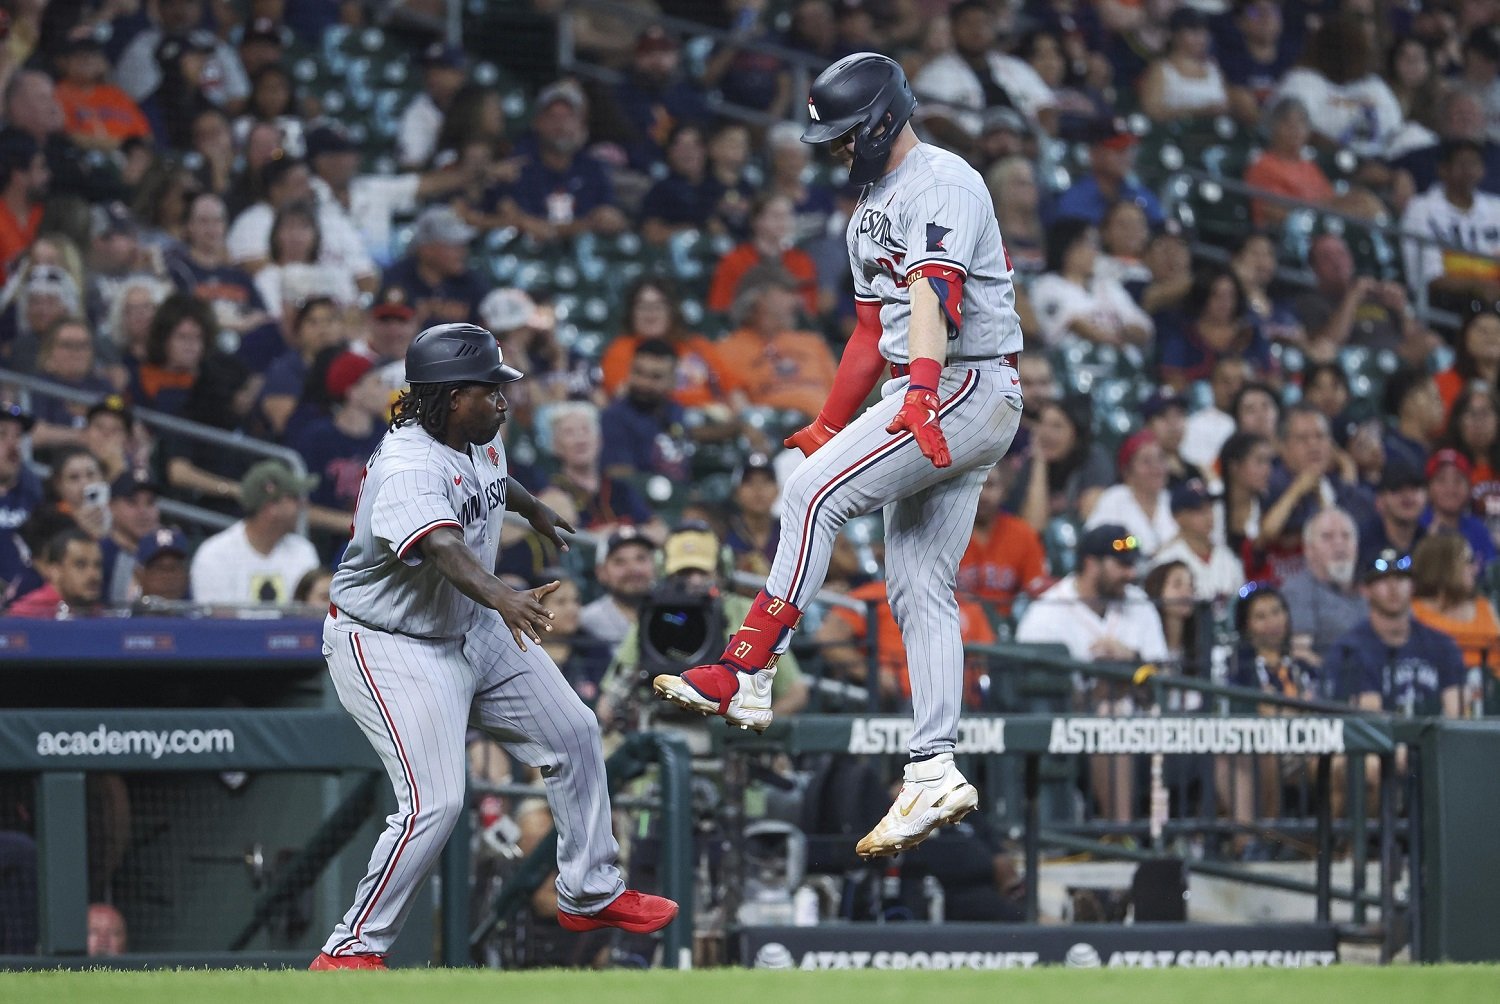 VIDEO: You Can Literally See What Appears to Be Astros' Sign